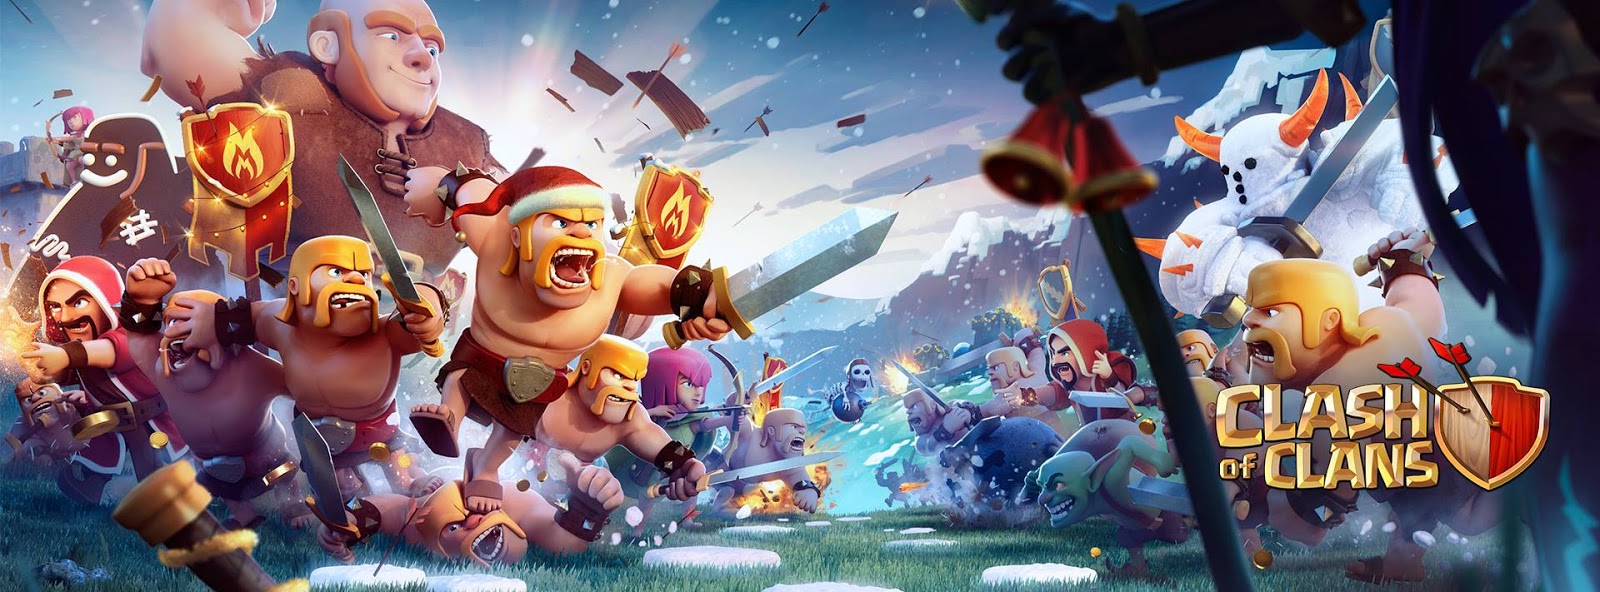 Clash of Clans (CoC) game poster. Clash of Clans (CoC) is a perfect example of a game that is good because of the richness of its story